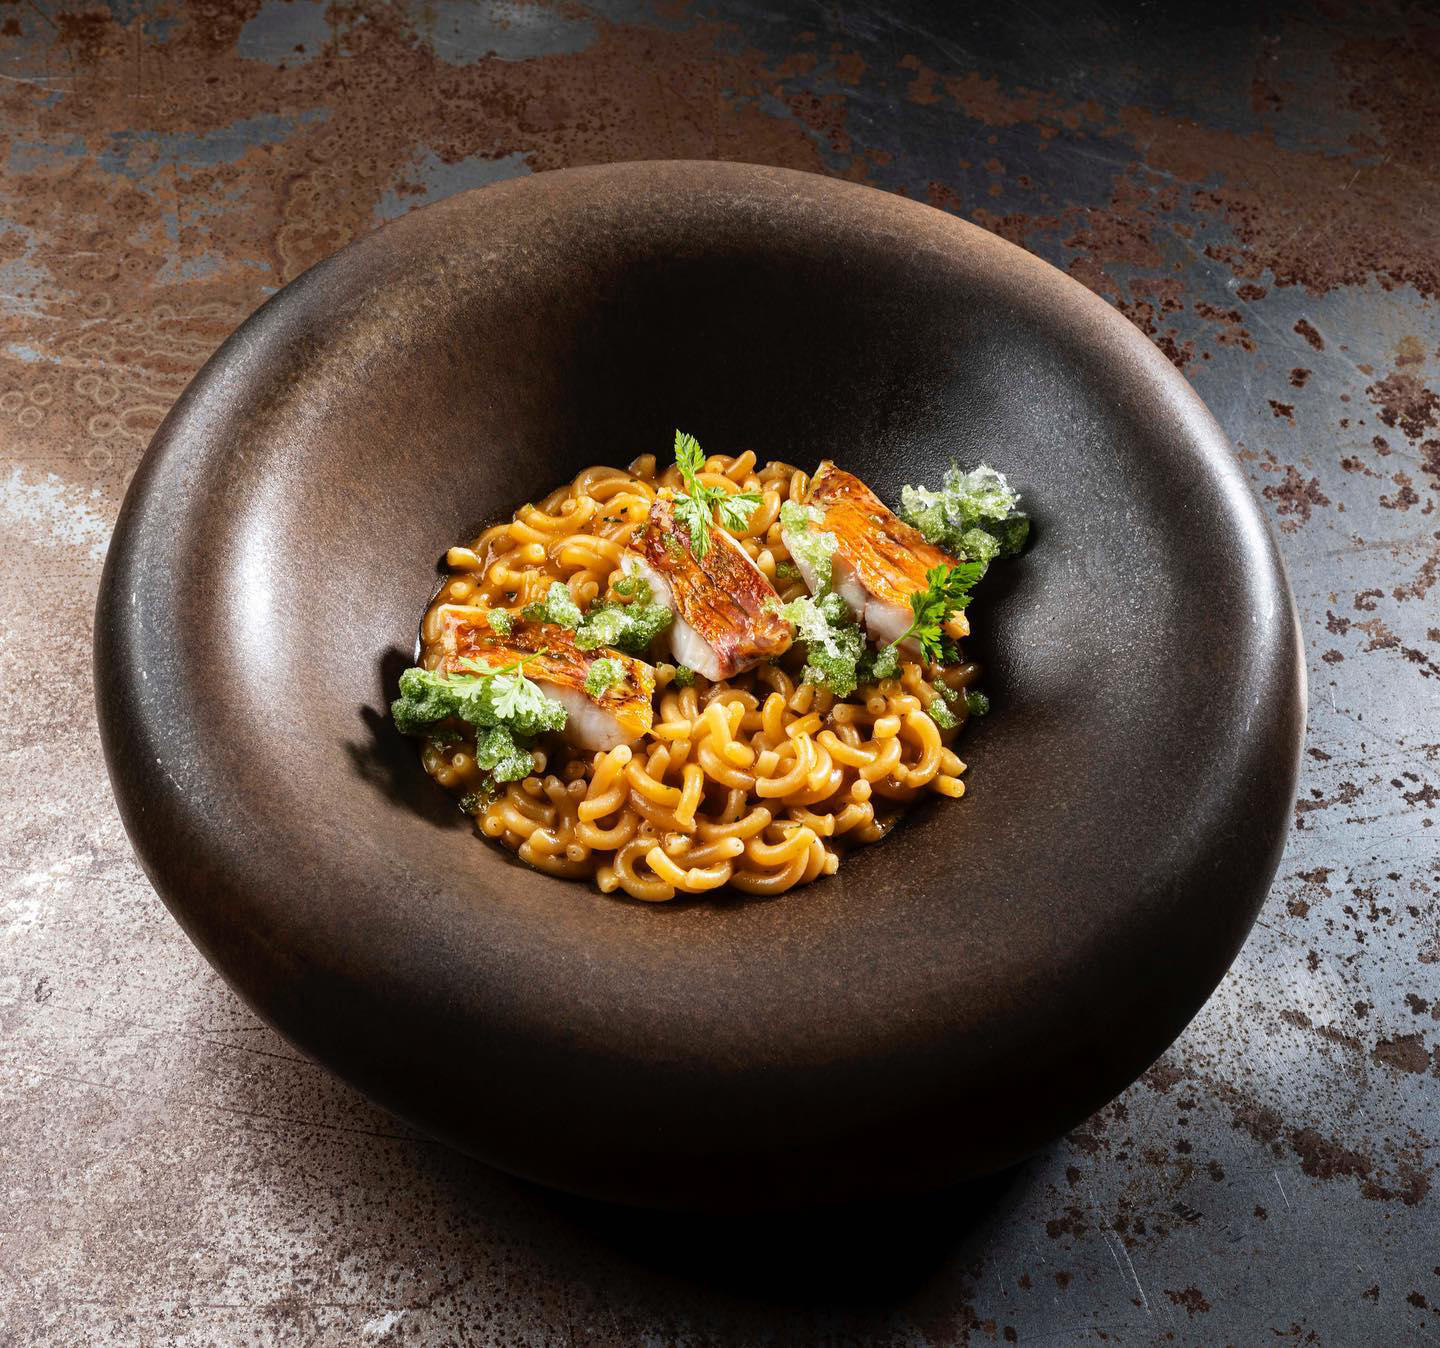 image  1 Excelsior Hotel Gallia, Milan - Today on #WorldPastaDay we present a very special dish from a la car